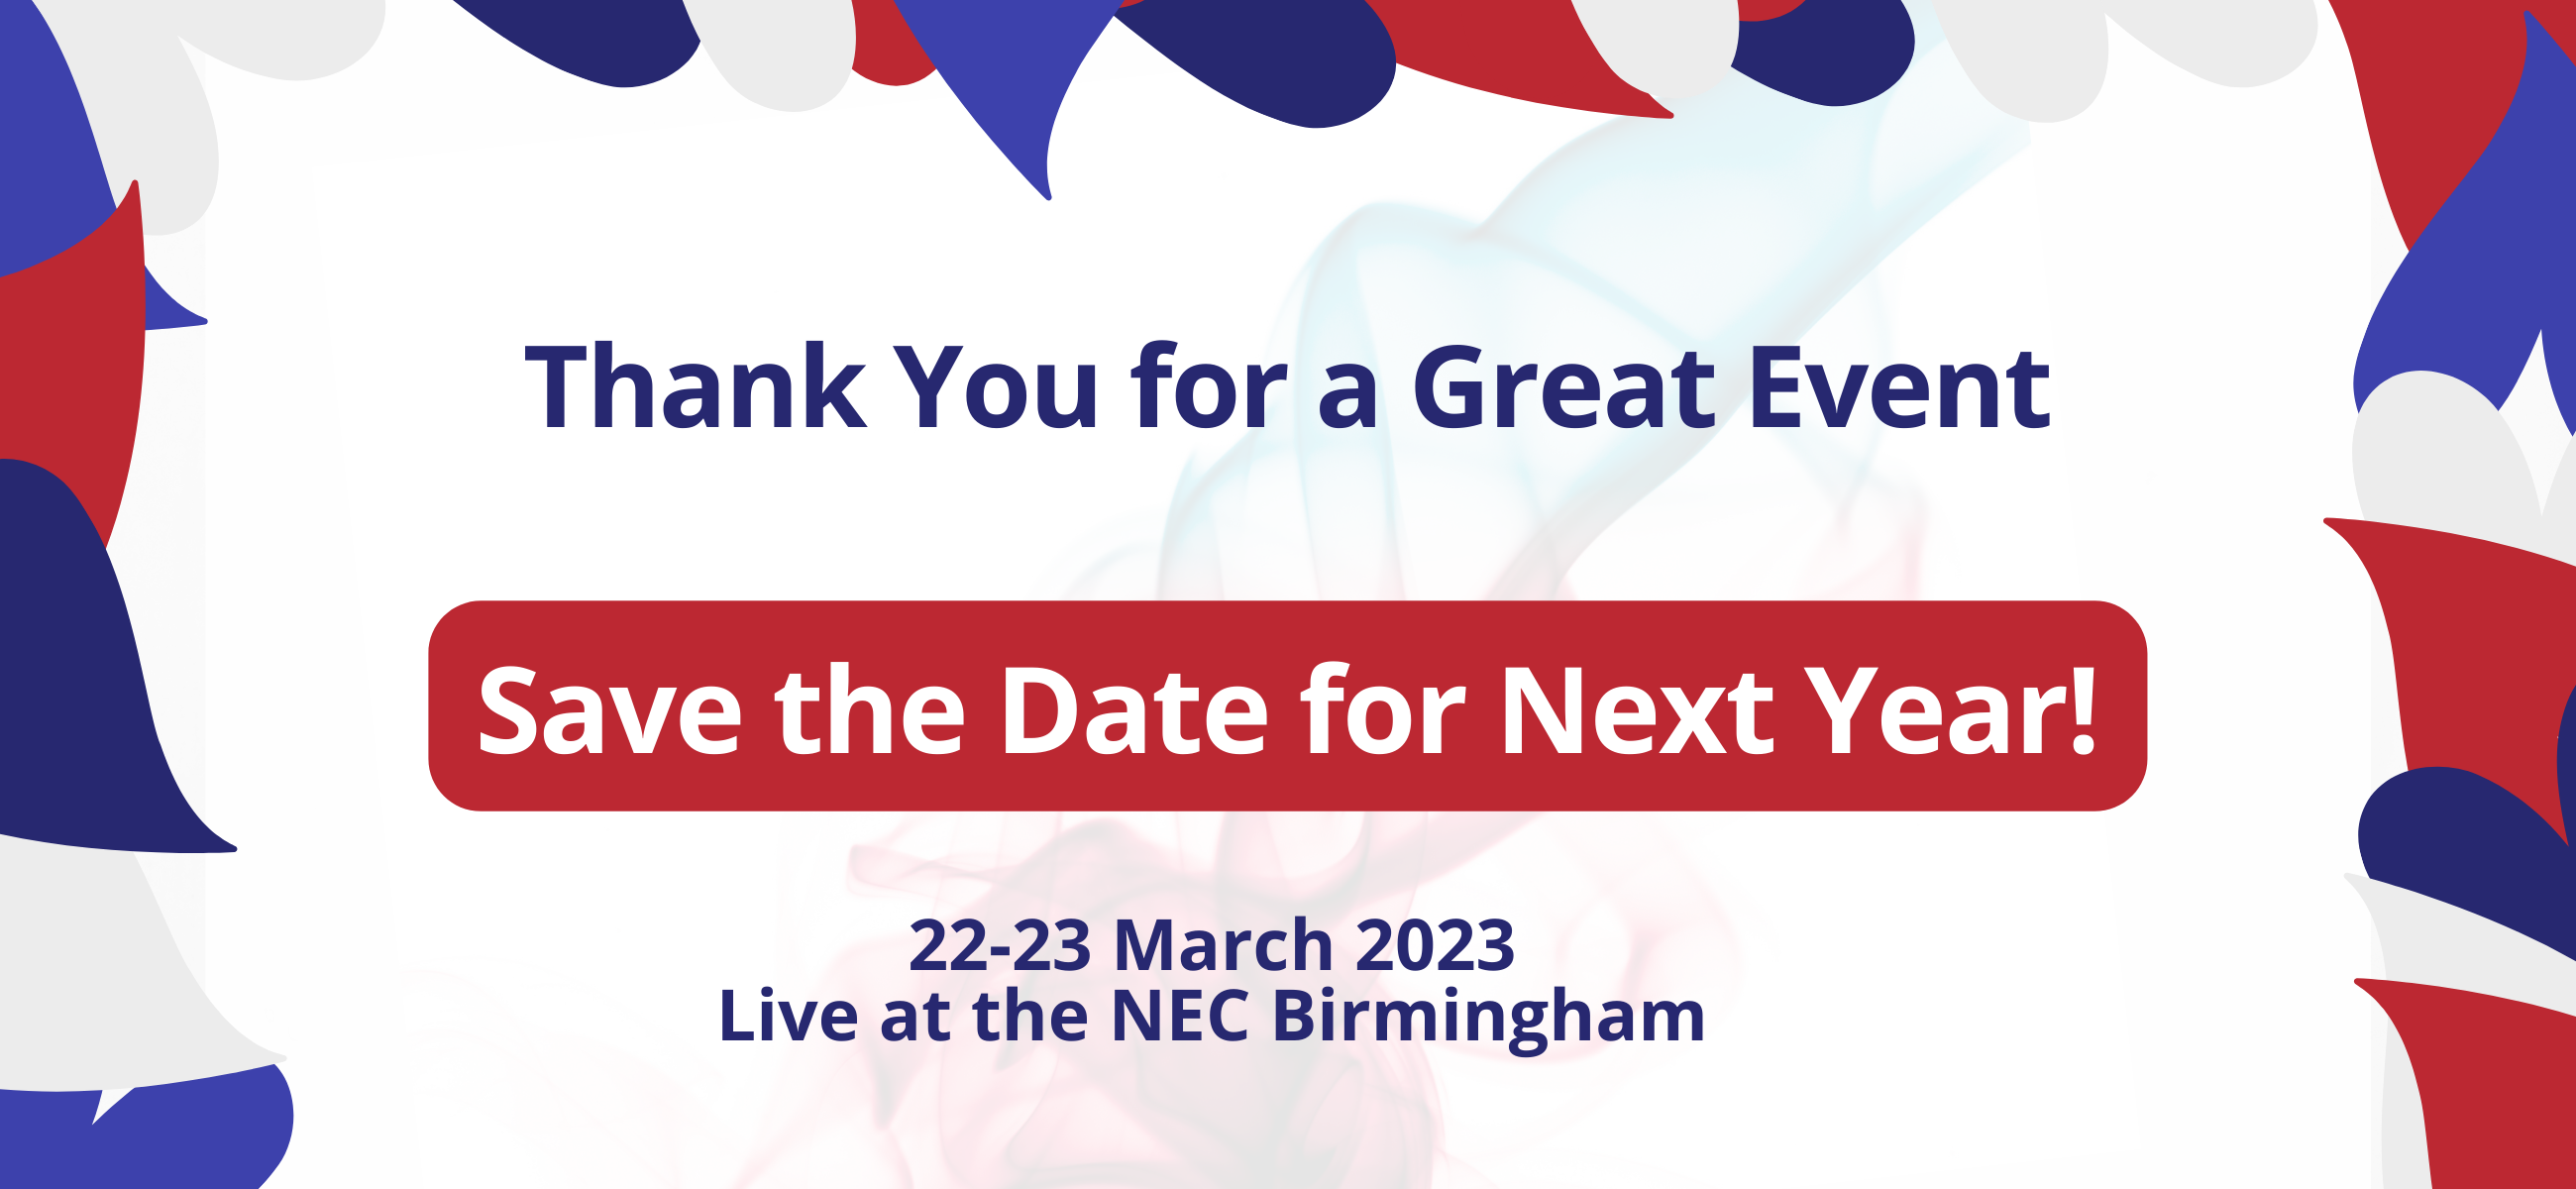 Thank you for a great event. Save the date for next year! 22-23 March Live at the NEC Birmingham